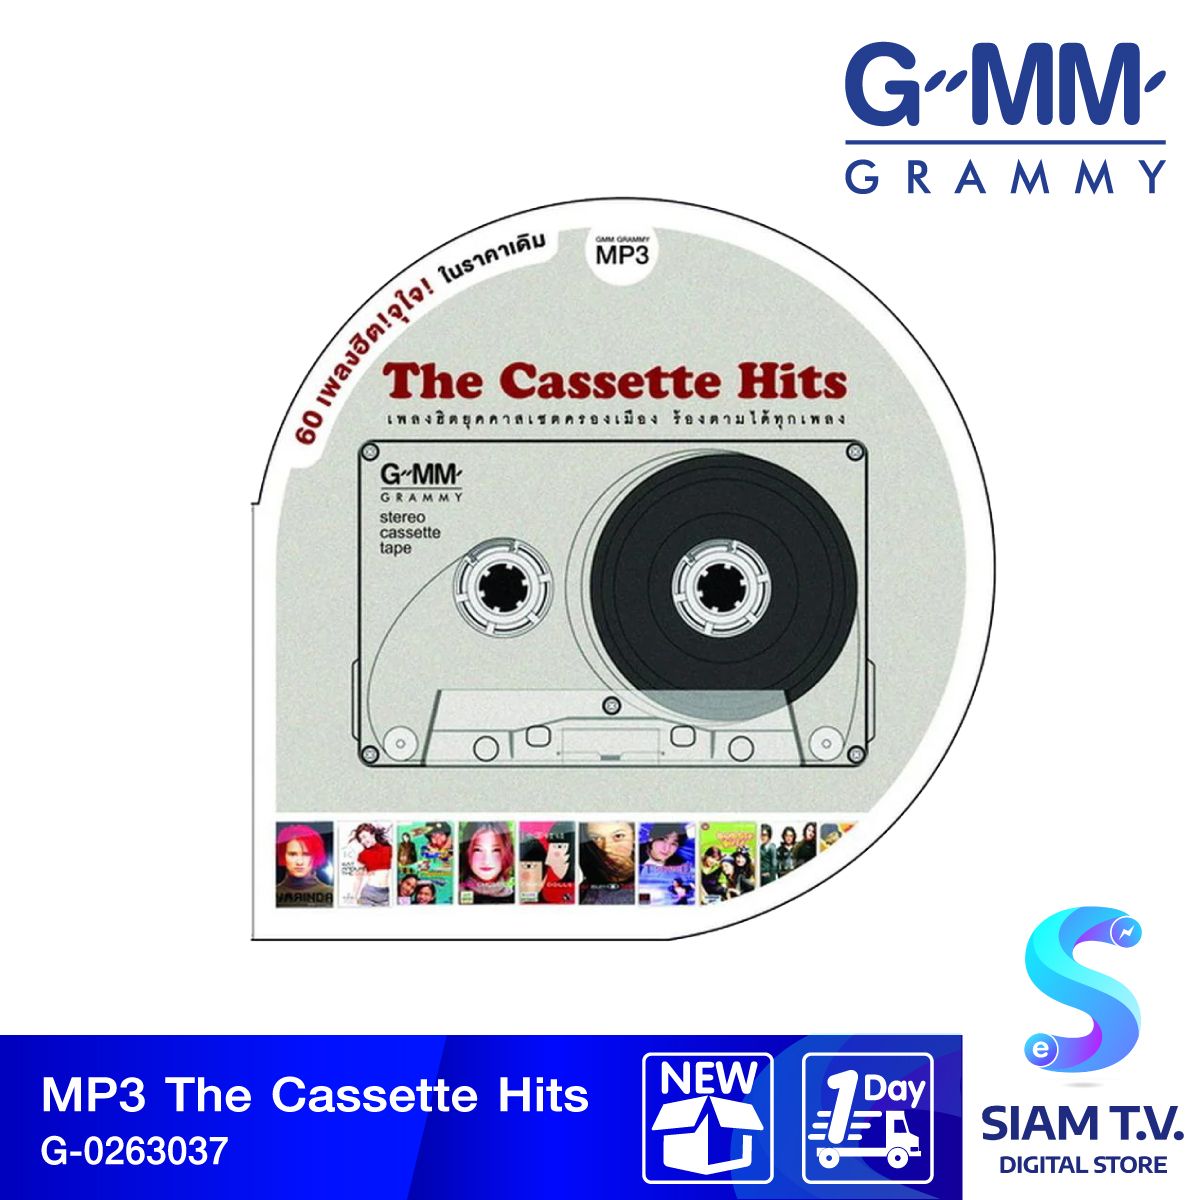 GMM GRAMMY  MP3 The Cassettle Hits Branded